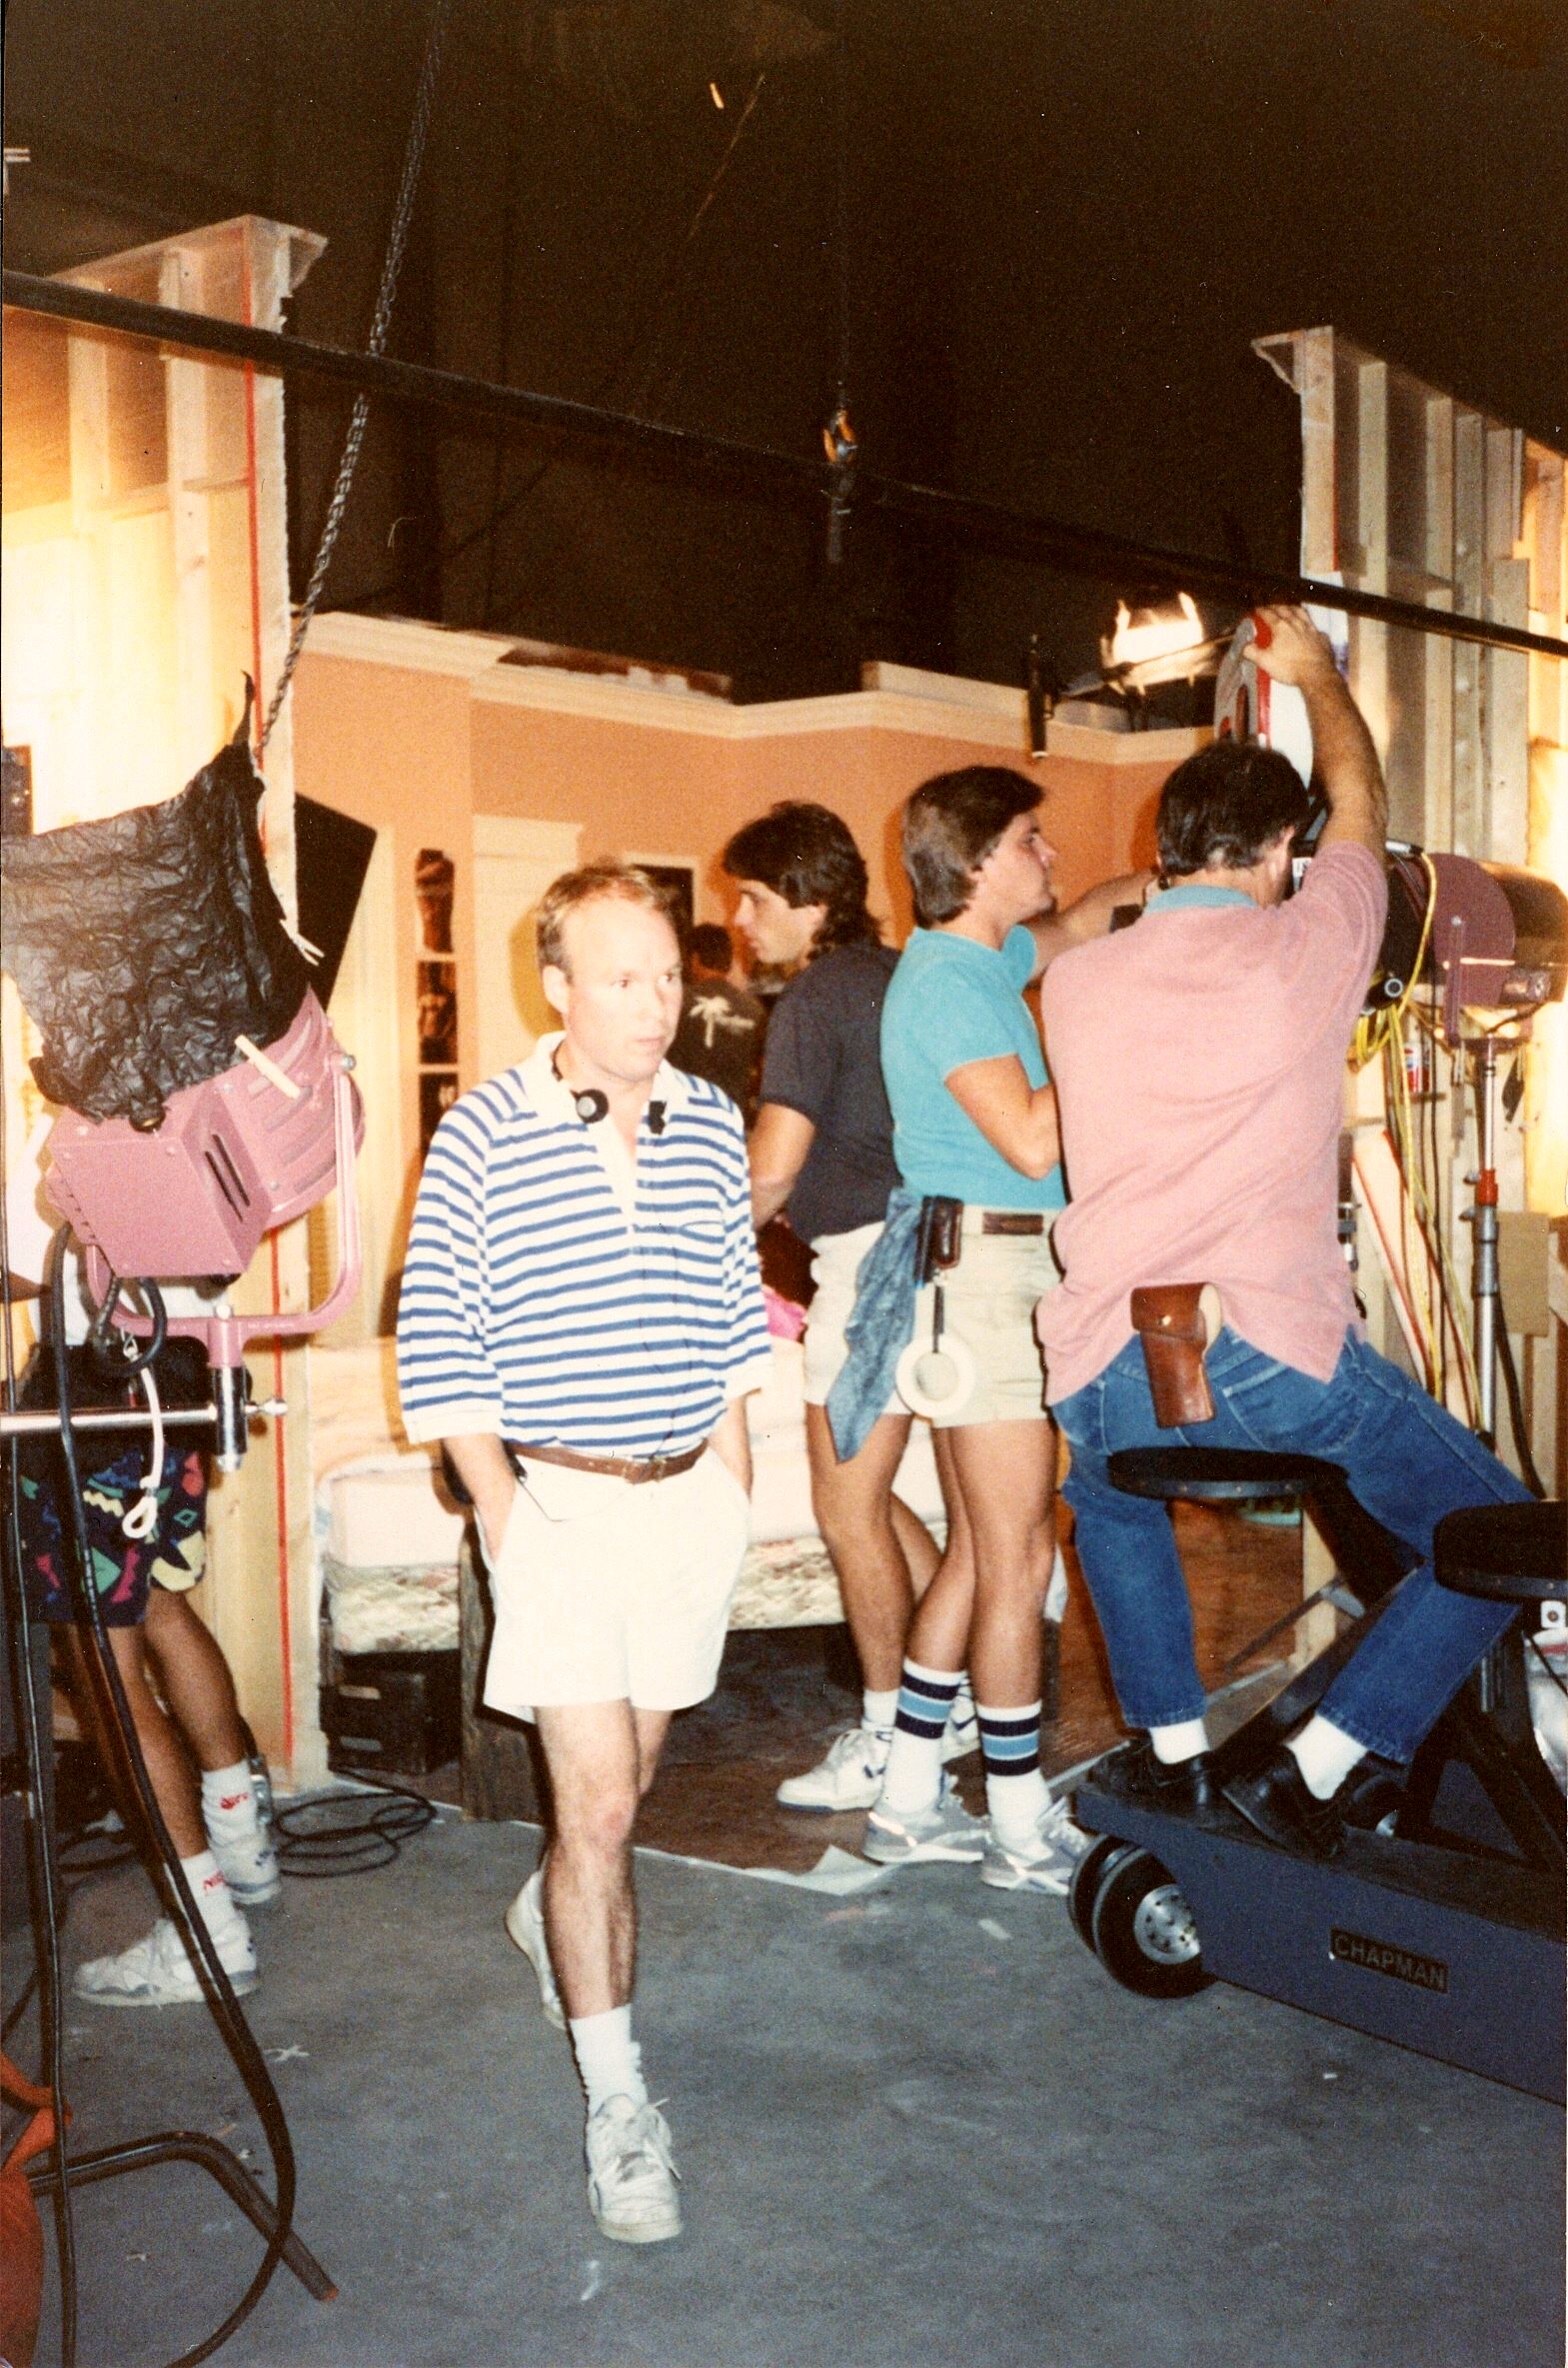 Tom Logan directing on the set of DREAMTRAP at Universal Studios.